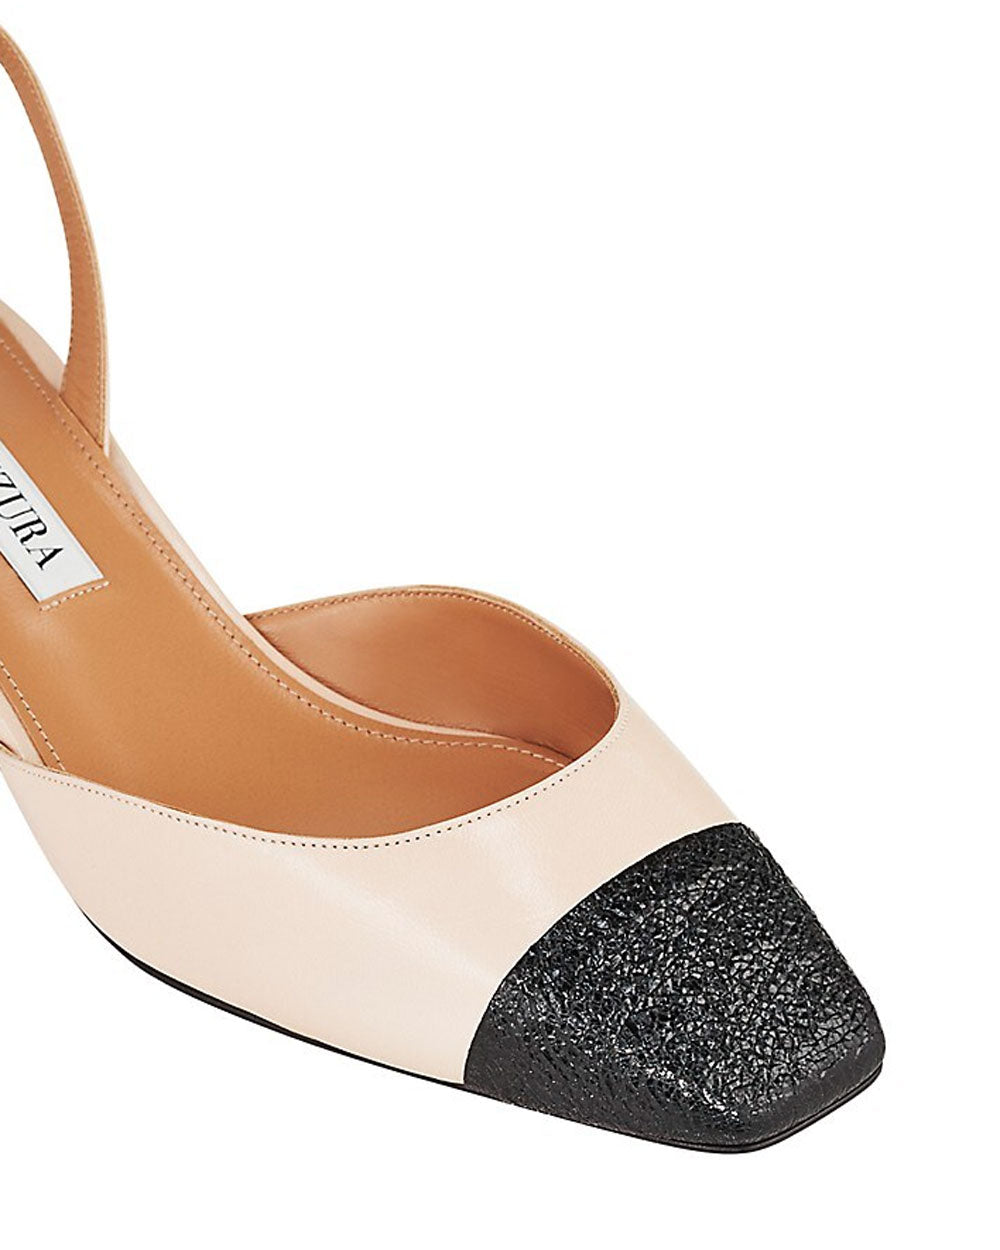 French Flirt Leather Block-Heel Pumps in Nude and Black